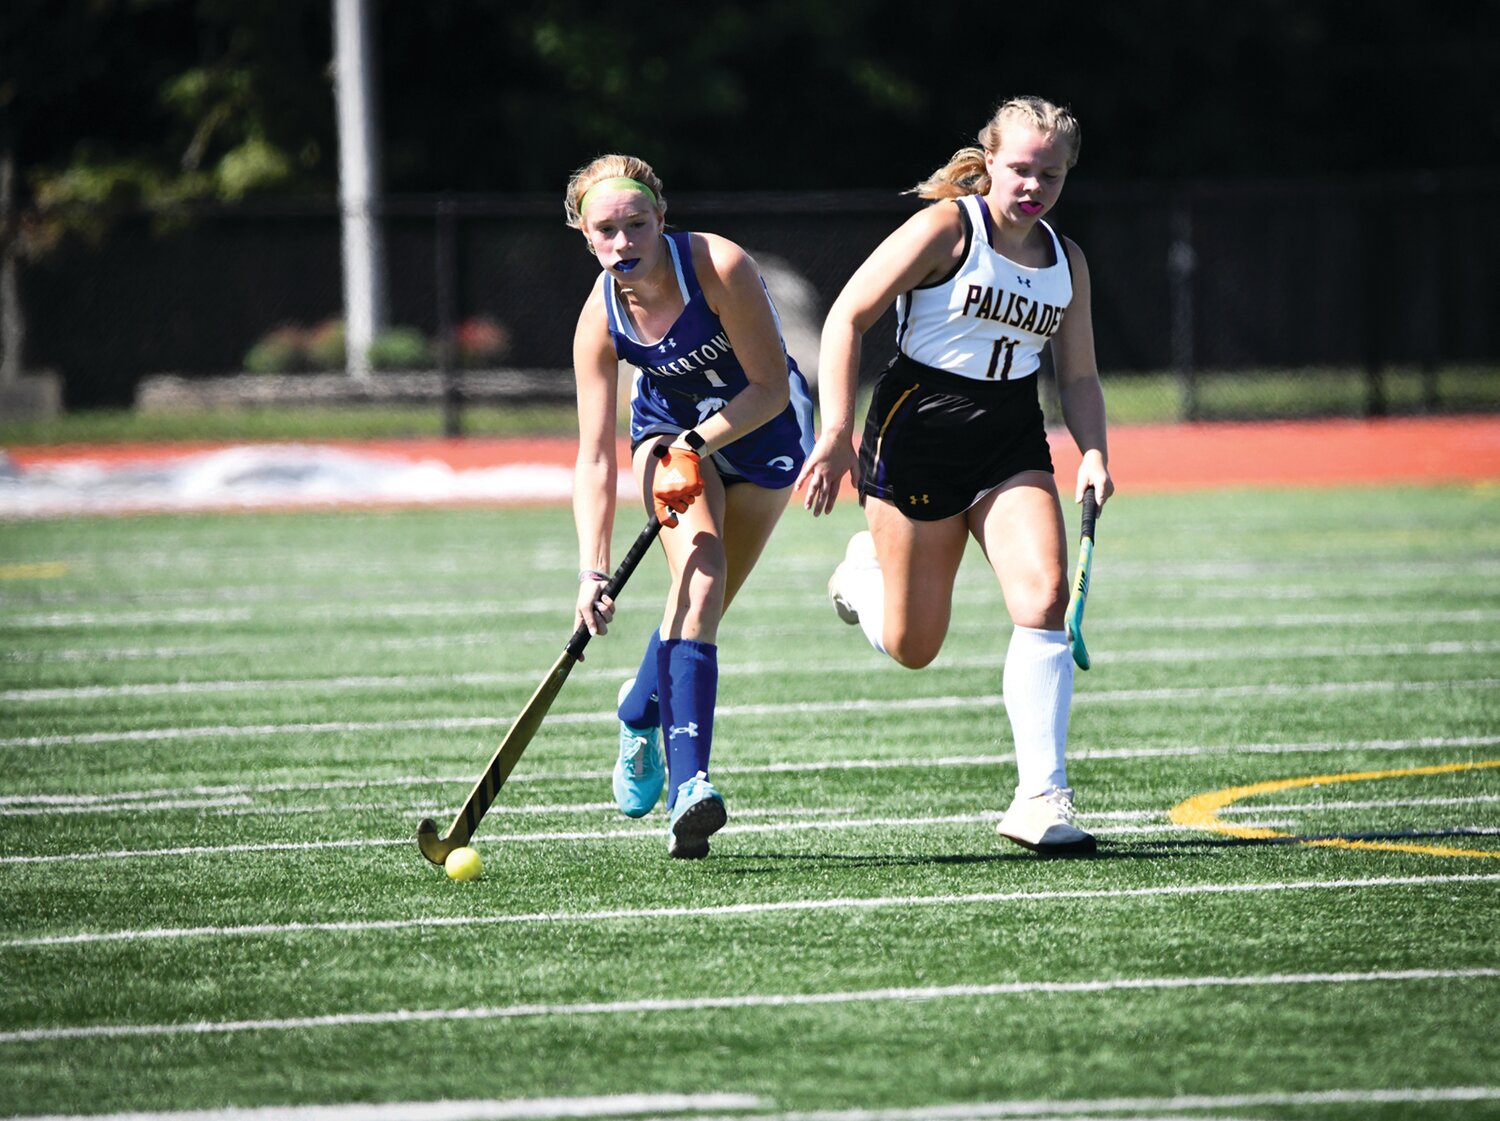 Quakertown’s Sunday Draper moves the ball down the field with Palisades’ Molly Stiansen in pursuit.